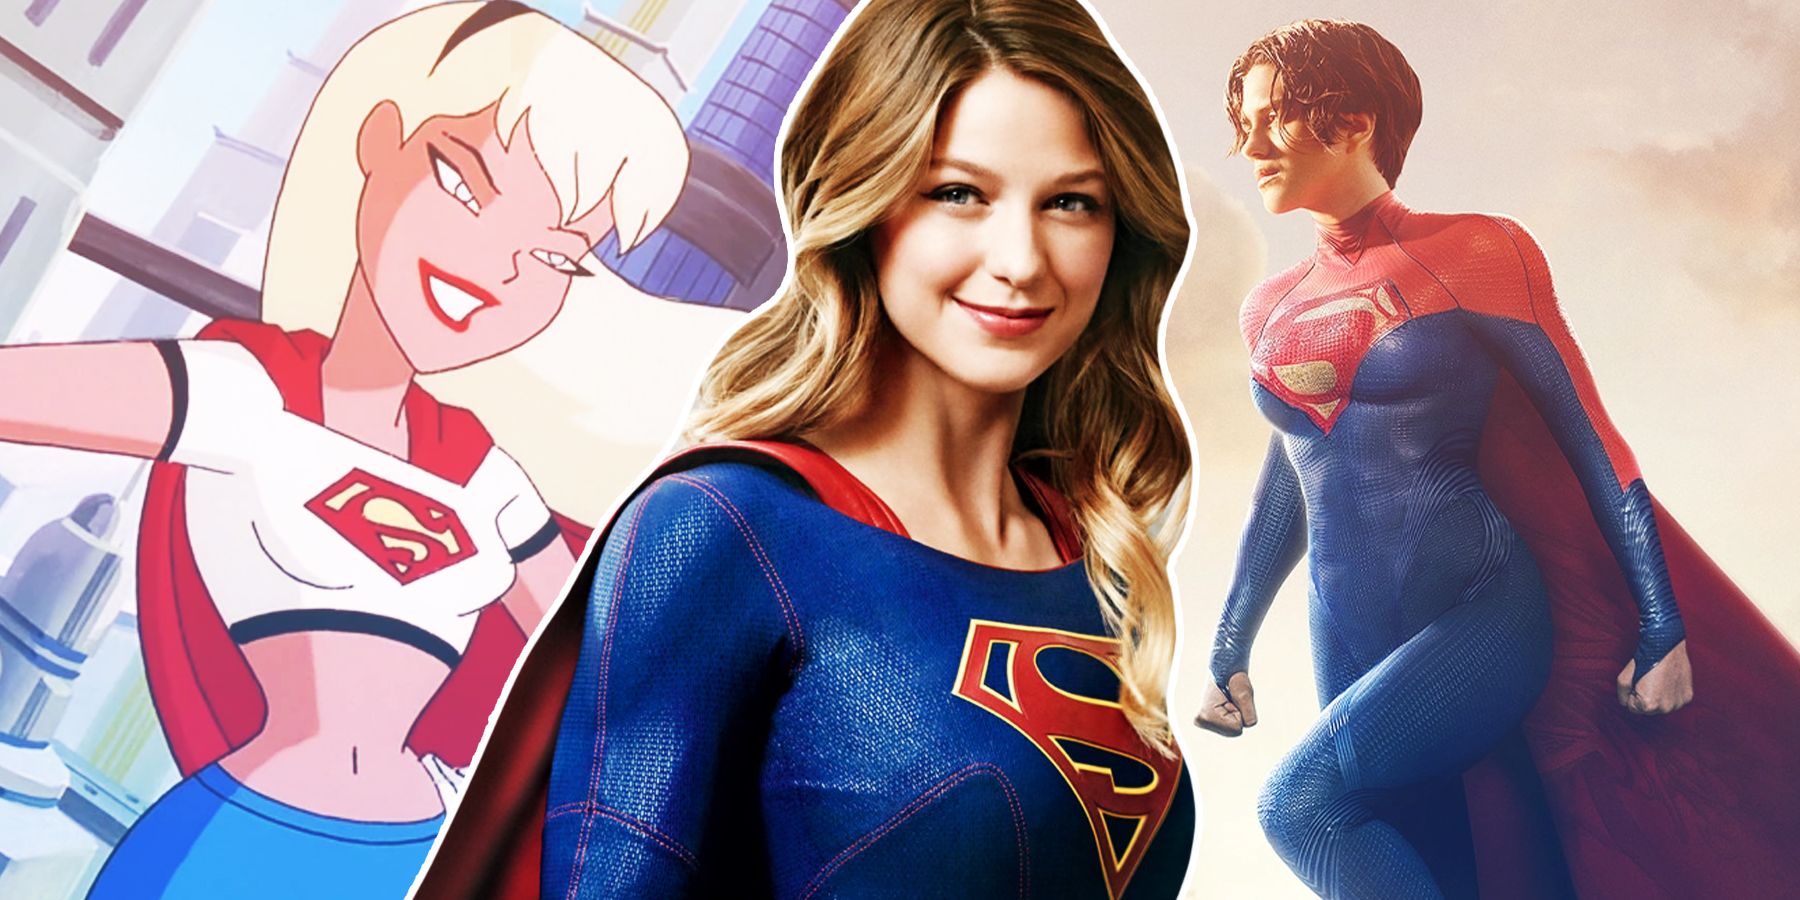 Supergirl as voice by Nicholle Tom in 1998's Superman: The Animated Series, Melissa Benoist as Supergirl in 2015 television series Supergirl, and Sasha Calle as Supergirl in 2023's movie The Flash